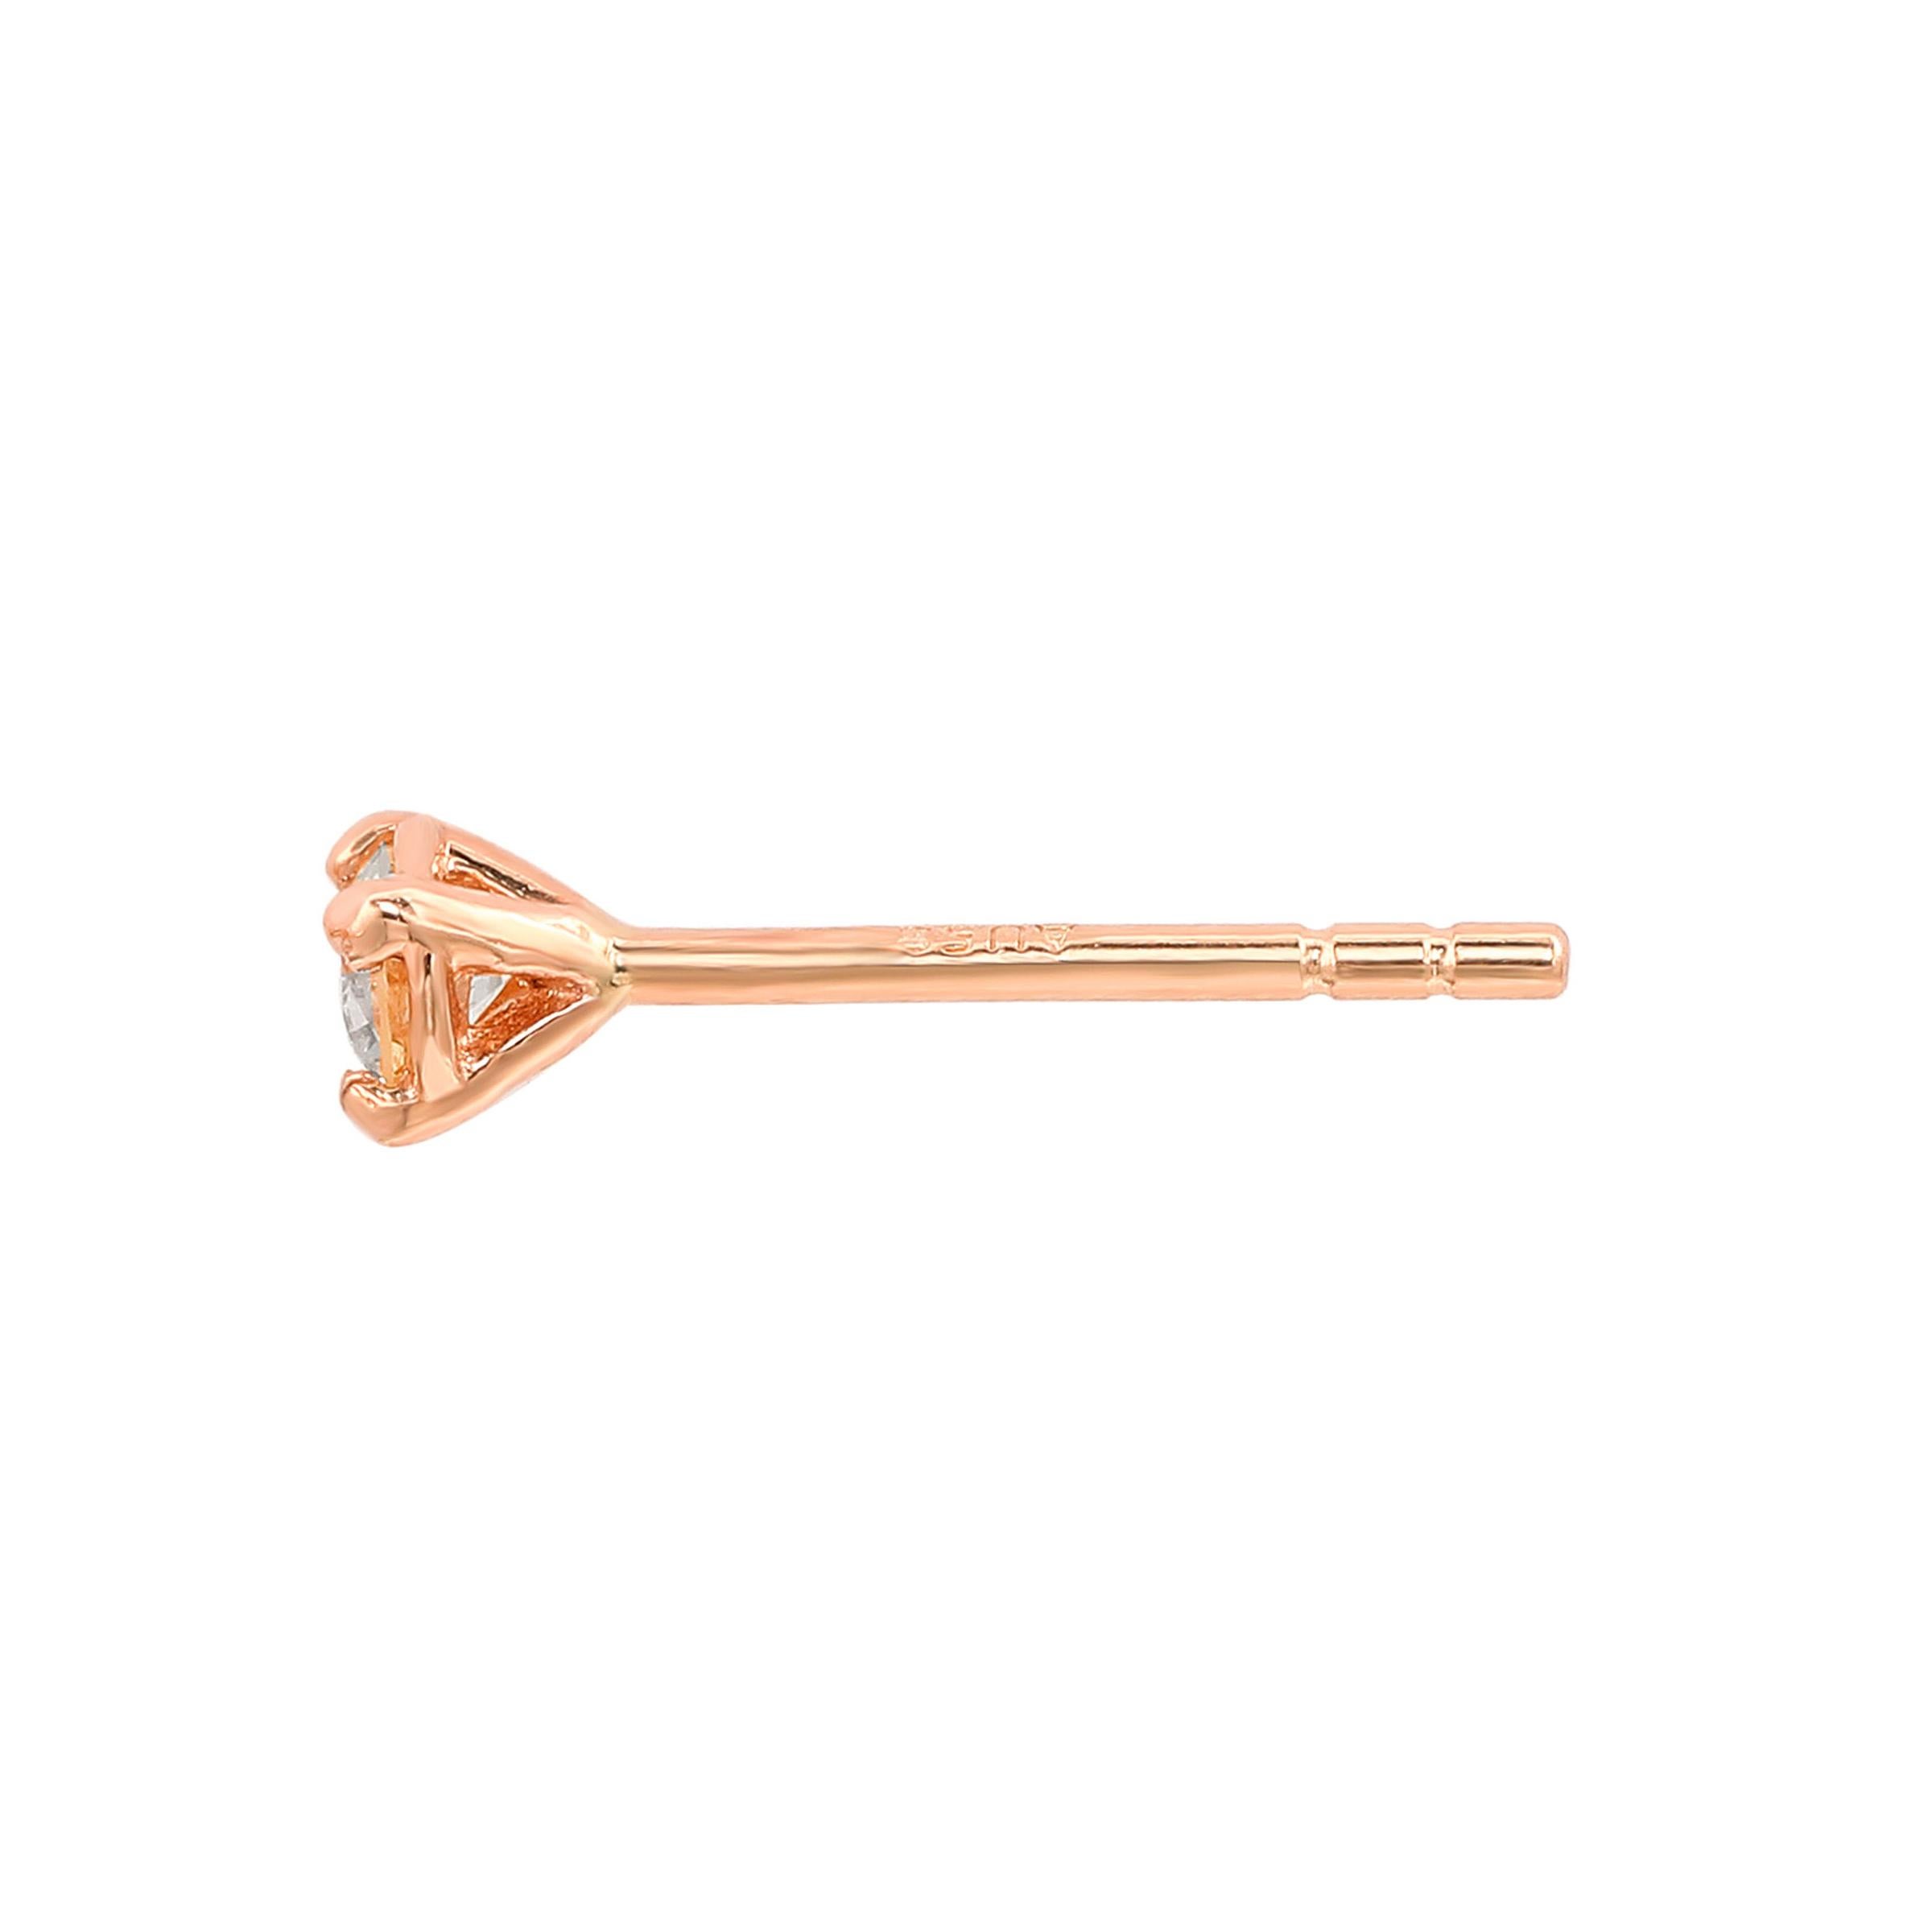 Perfect as a second or third piercing. Add an elegant accent to your outfit with this sparkling stud earring featuring one gorgeous white diamond in a prong setting. Crafted in 14-karat rose gold, this earring has a high polish finish and butterfly